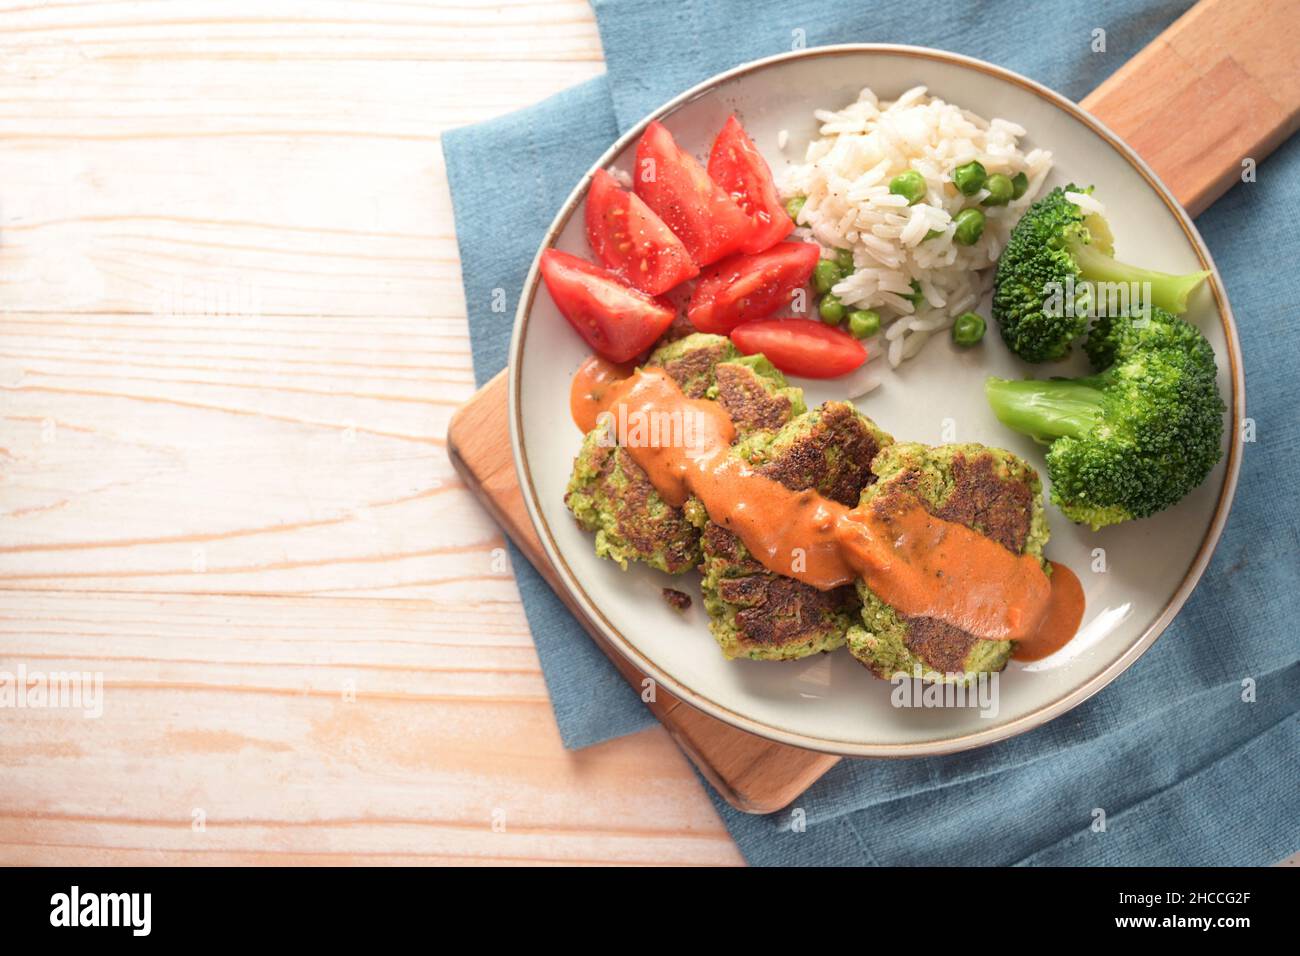 Vegetable patties with broccoli, tomato, rice and a hot sauce, vegetarian and vegan meal on a plate and a cutting board, blue napkin and light wooden Stock Photo